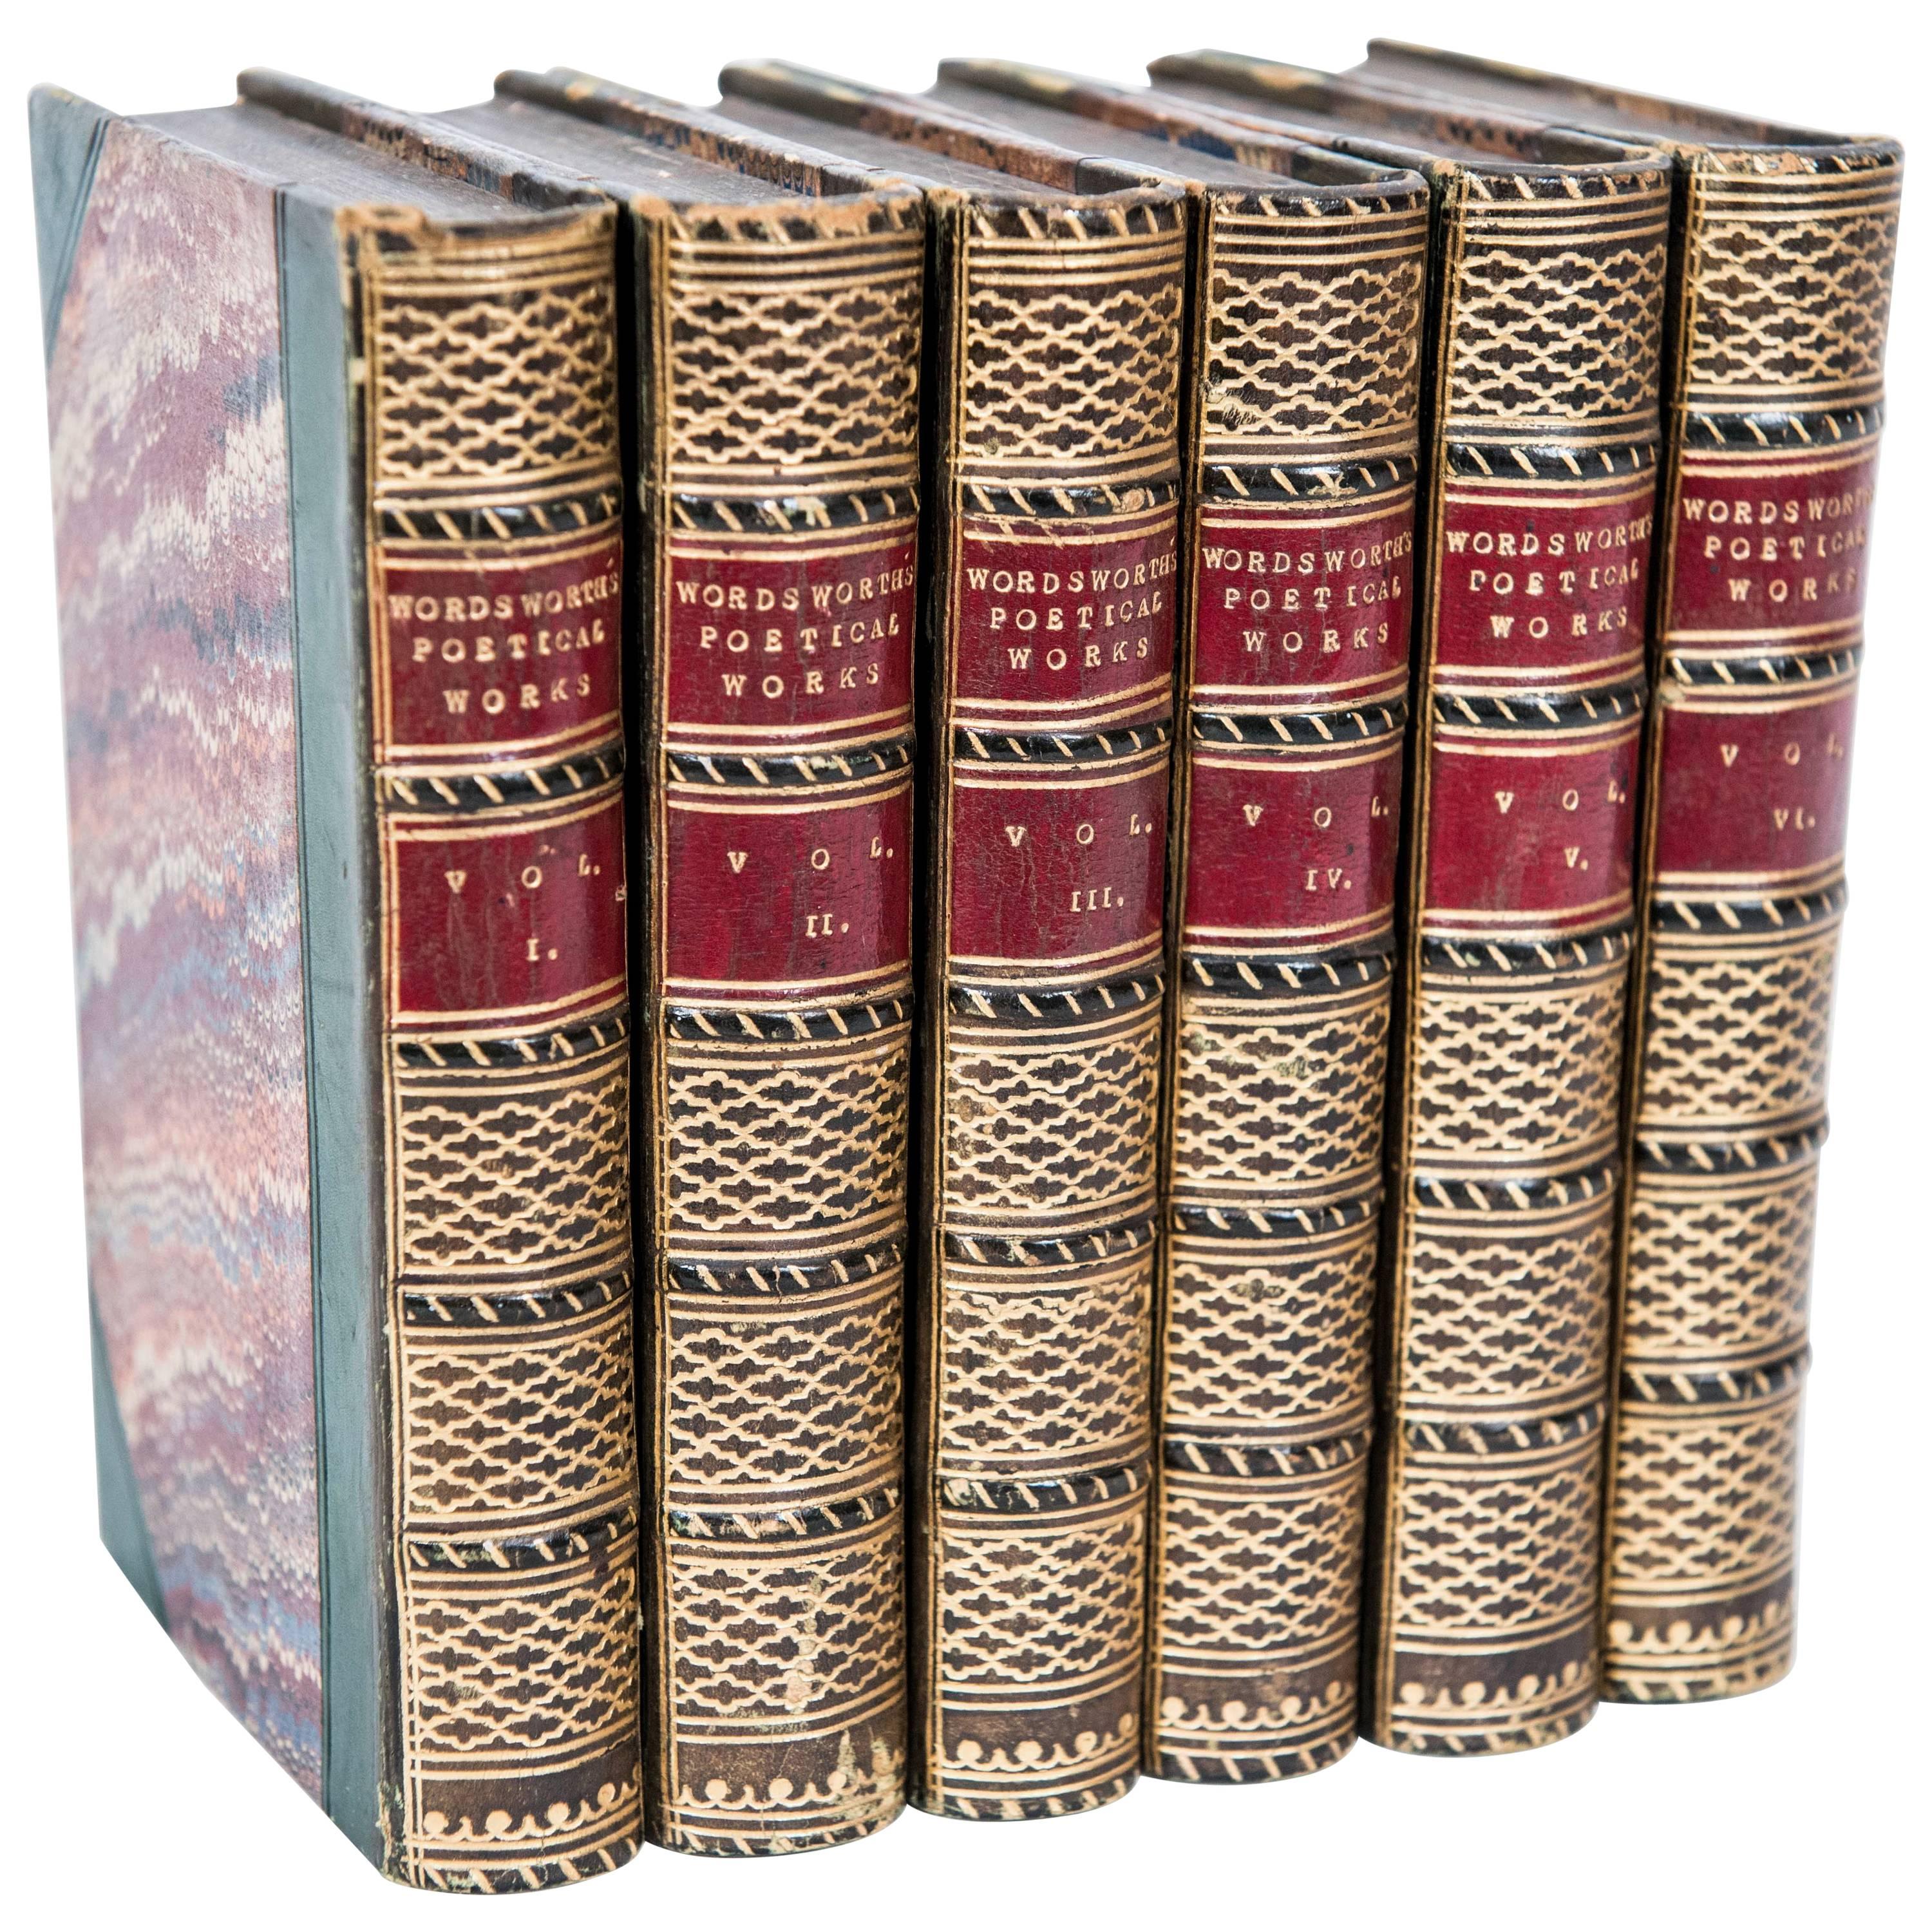 Poetical Works of William Wordsworth in Six Volumes, Leather, circa 1849